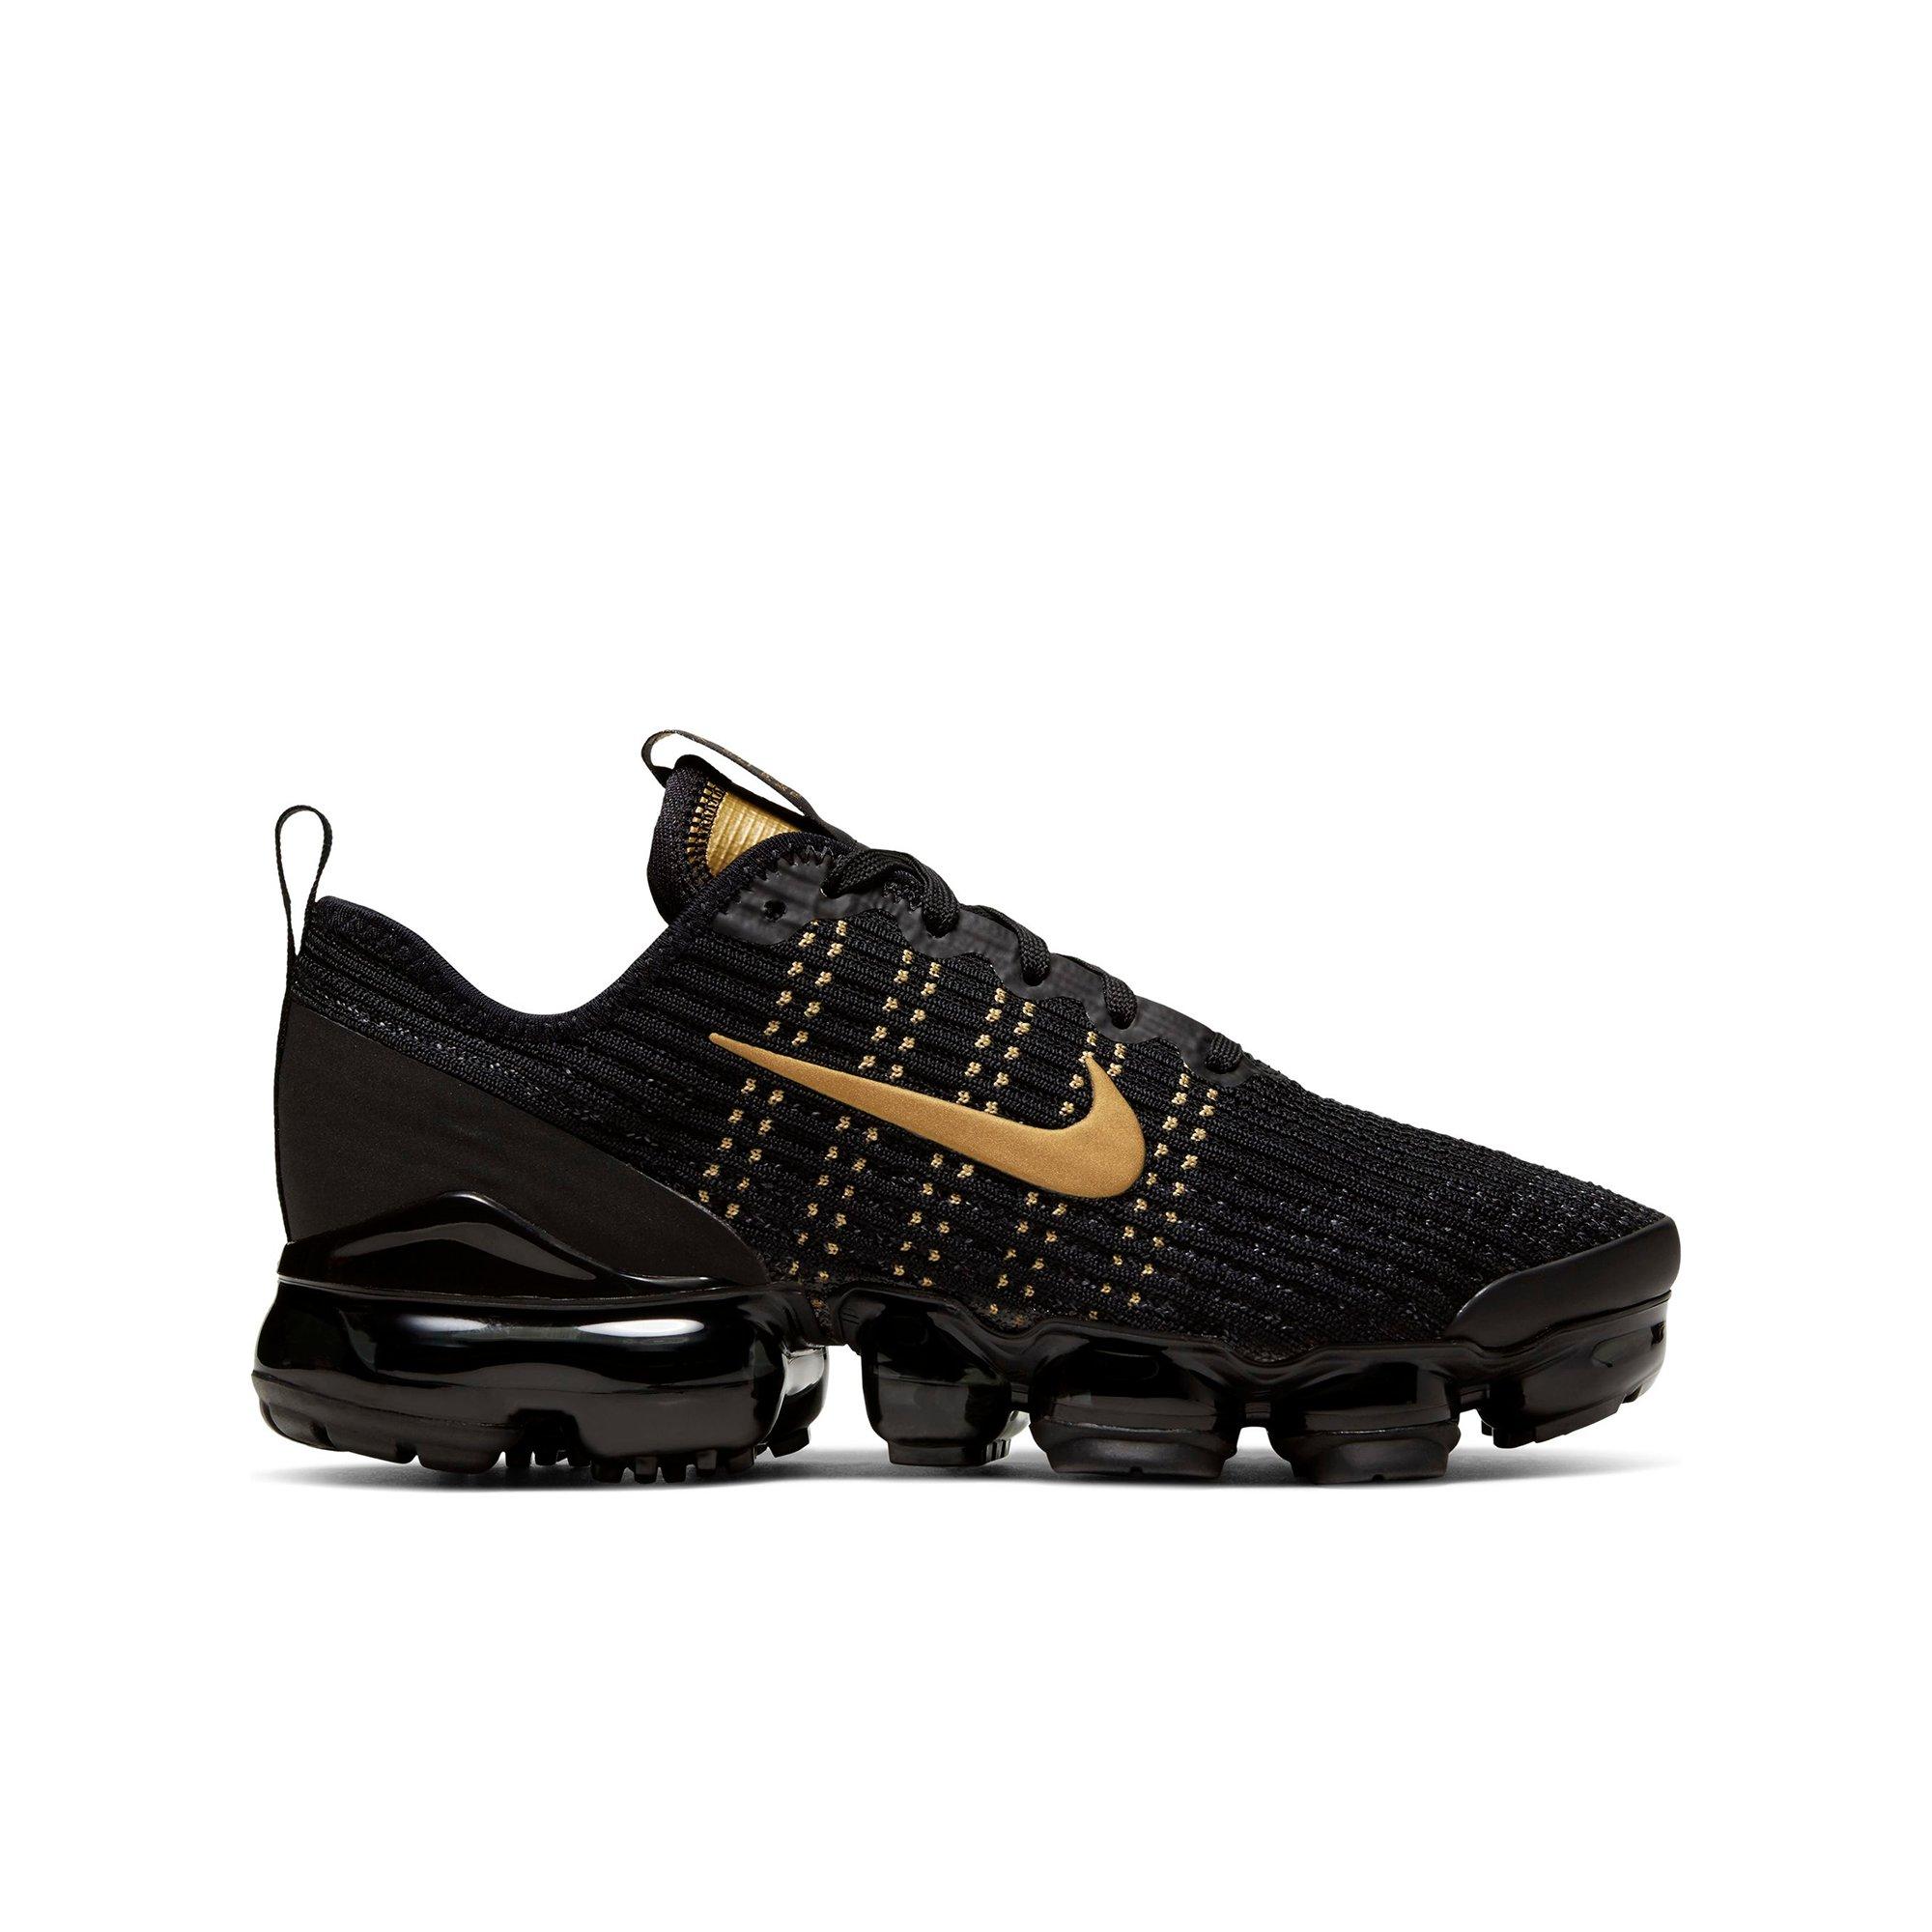 black and gold vapormax flyknit 3